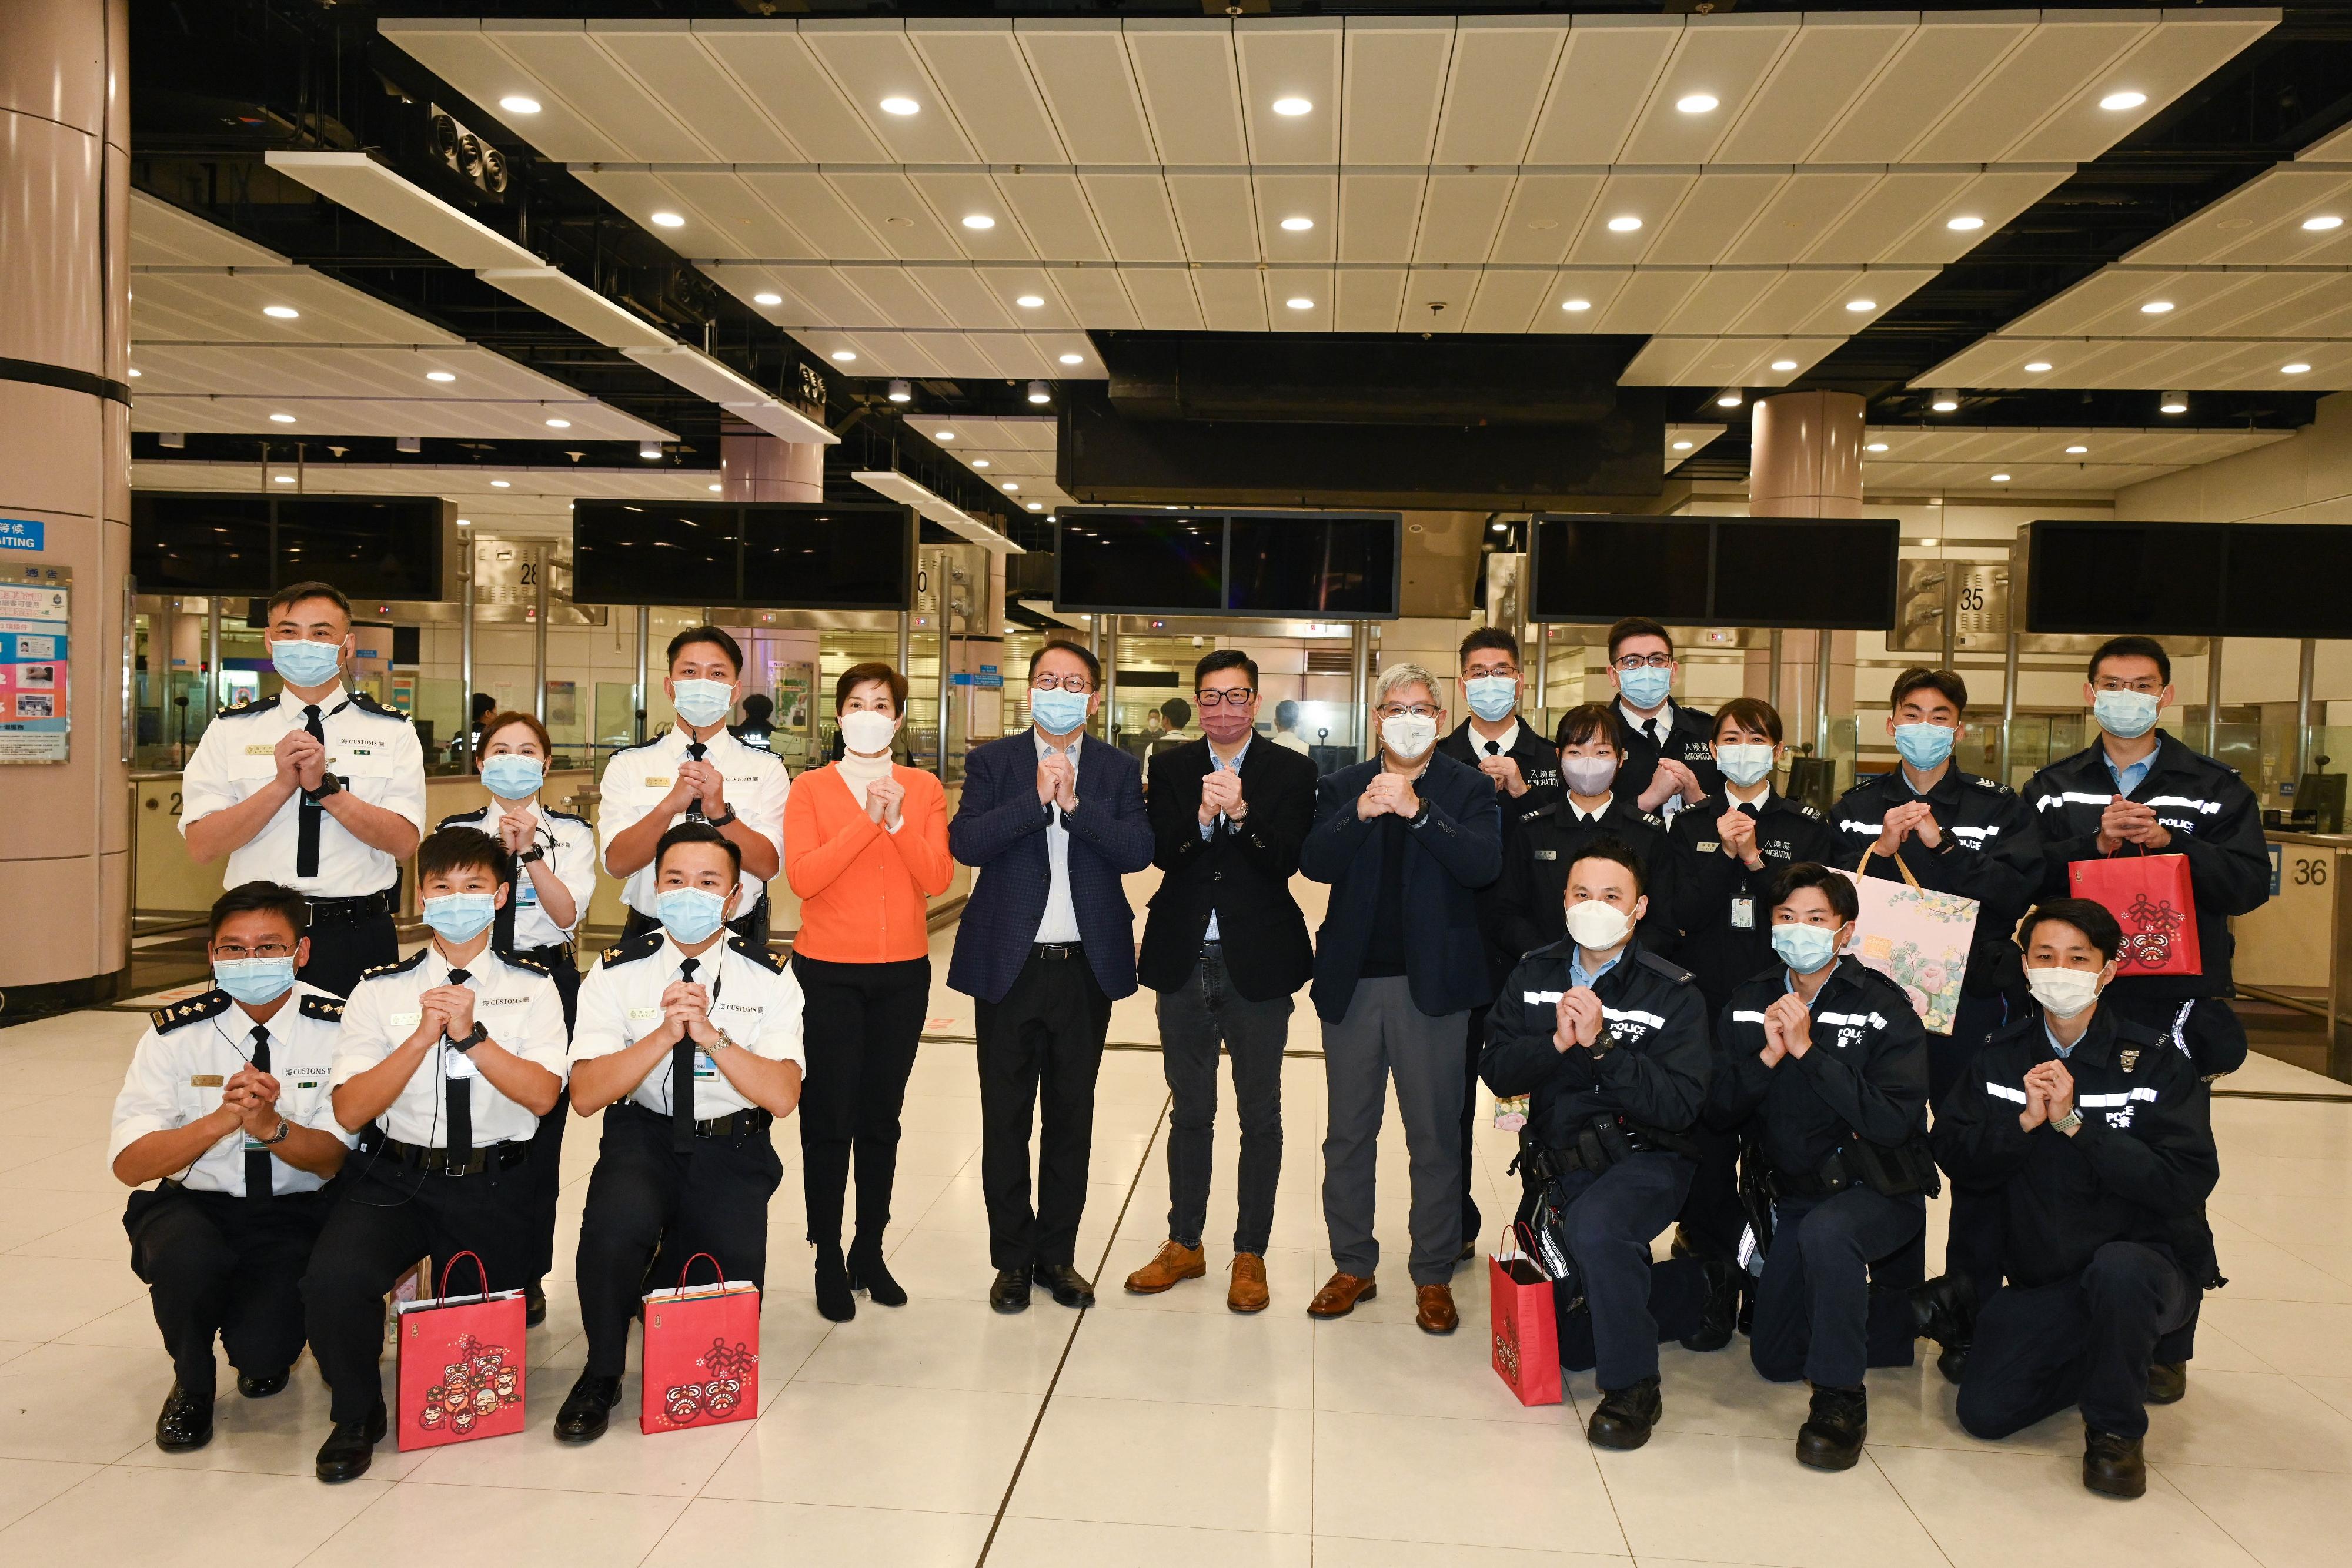 The Chief Secretary for Administration, Mr Chan Kwok-ki (second row, fifth left), today (January 22), on the first day of the Lunar New Year, visits the Lok Ma Chau Spur Line/Futian Control Point to inspect its operation. He is accompanied by the Secretary for Security, Mr Tang Ping-keung (second row, sixth left); the Director of Immigration, Mr Au Ka-wang (second row, fifth right); and the Commissioner of Customs and Excise, Ms Louise Ho (second row, fourth left). He meets the frontline staff of the Immigration Department, the Customs and Excise Department and the Hong Kong Police Force on duty, and extends his heartfelt gratitude to them for their hard work during the Lunar New Year period.